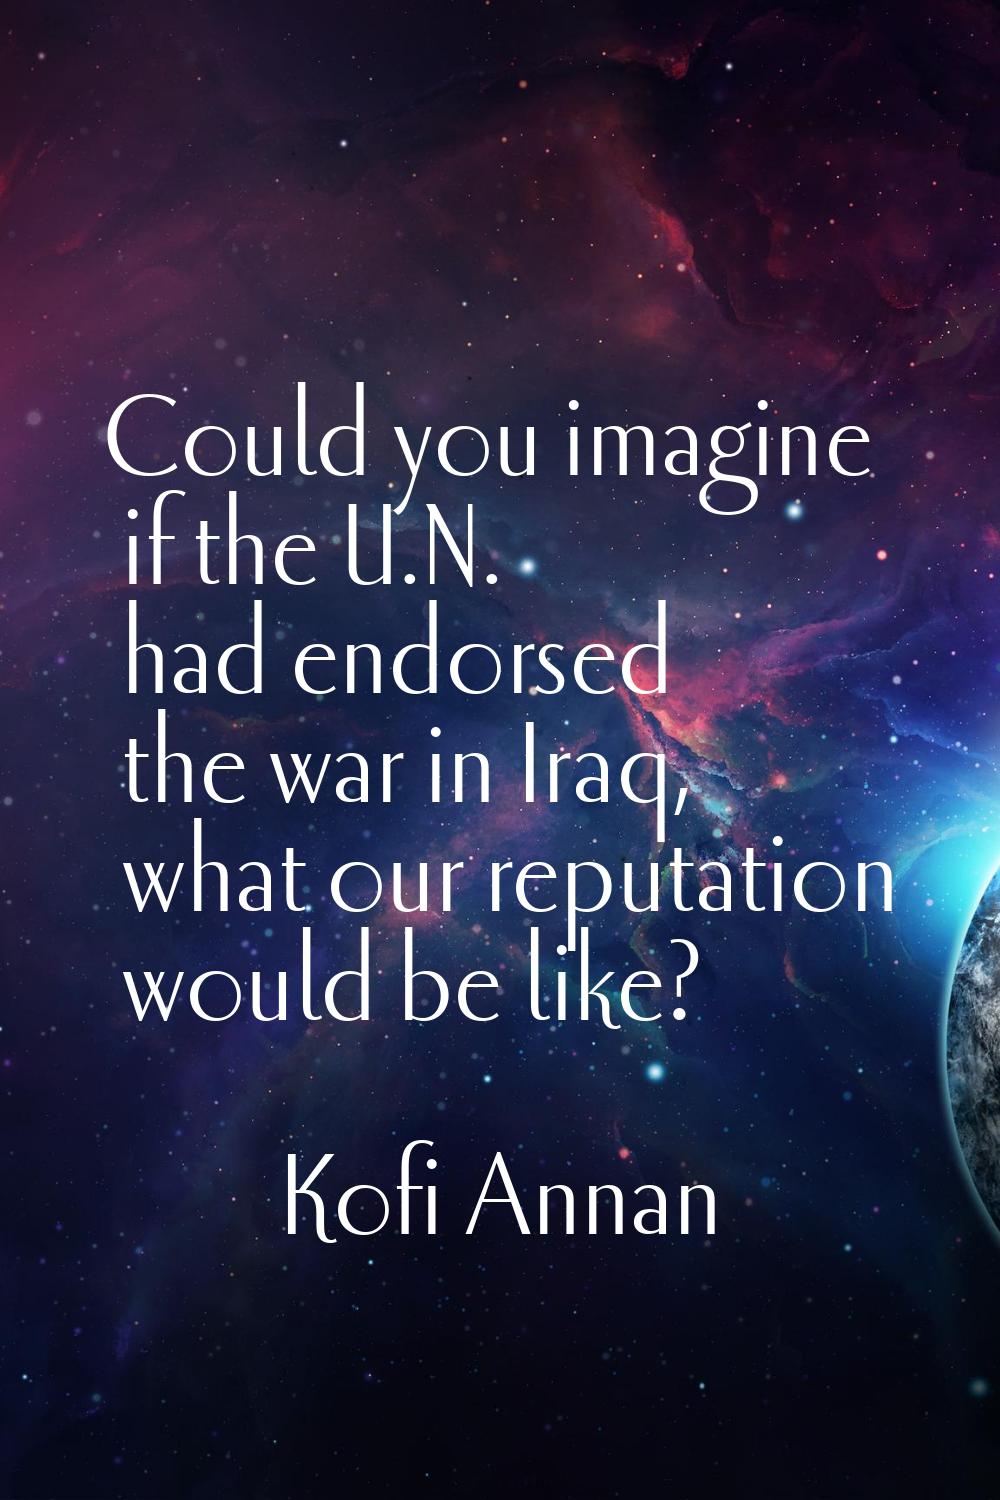 Could you imagine if the U.N. had endorsed the war in Iraq, what our reputation would be like?